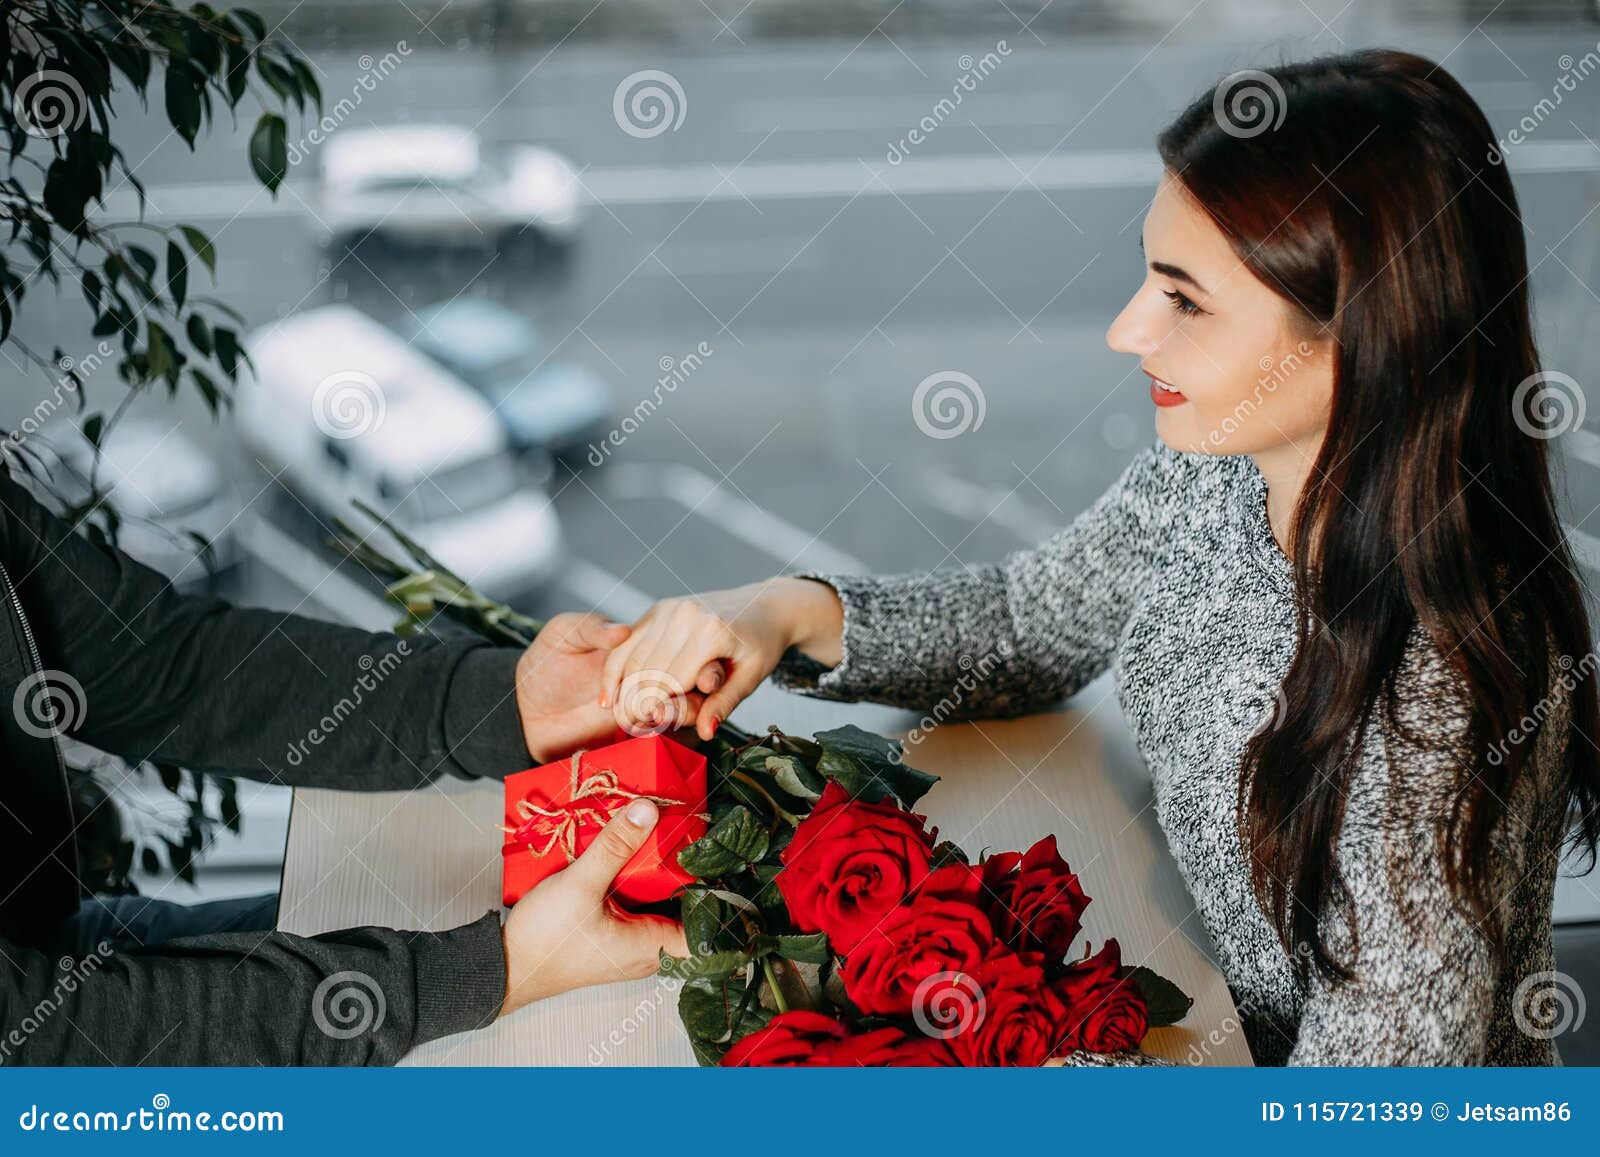 Romance Background, Couple in Love on Date, Man Giving Roses and ...